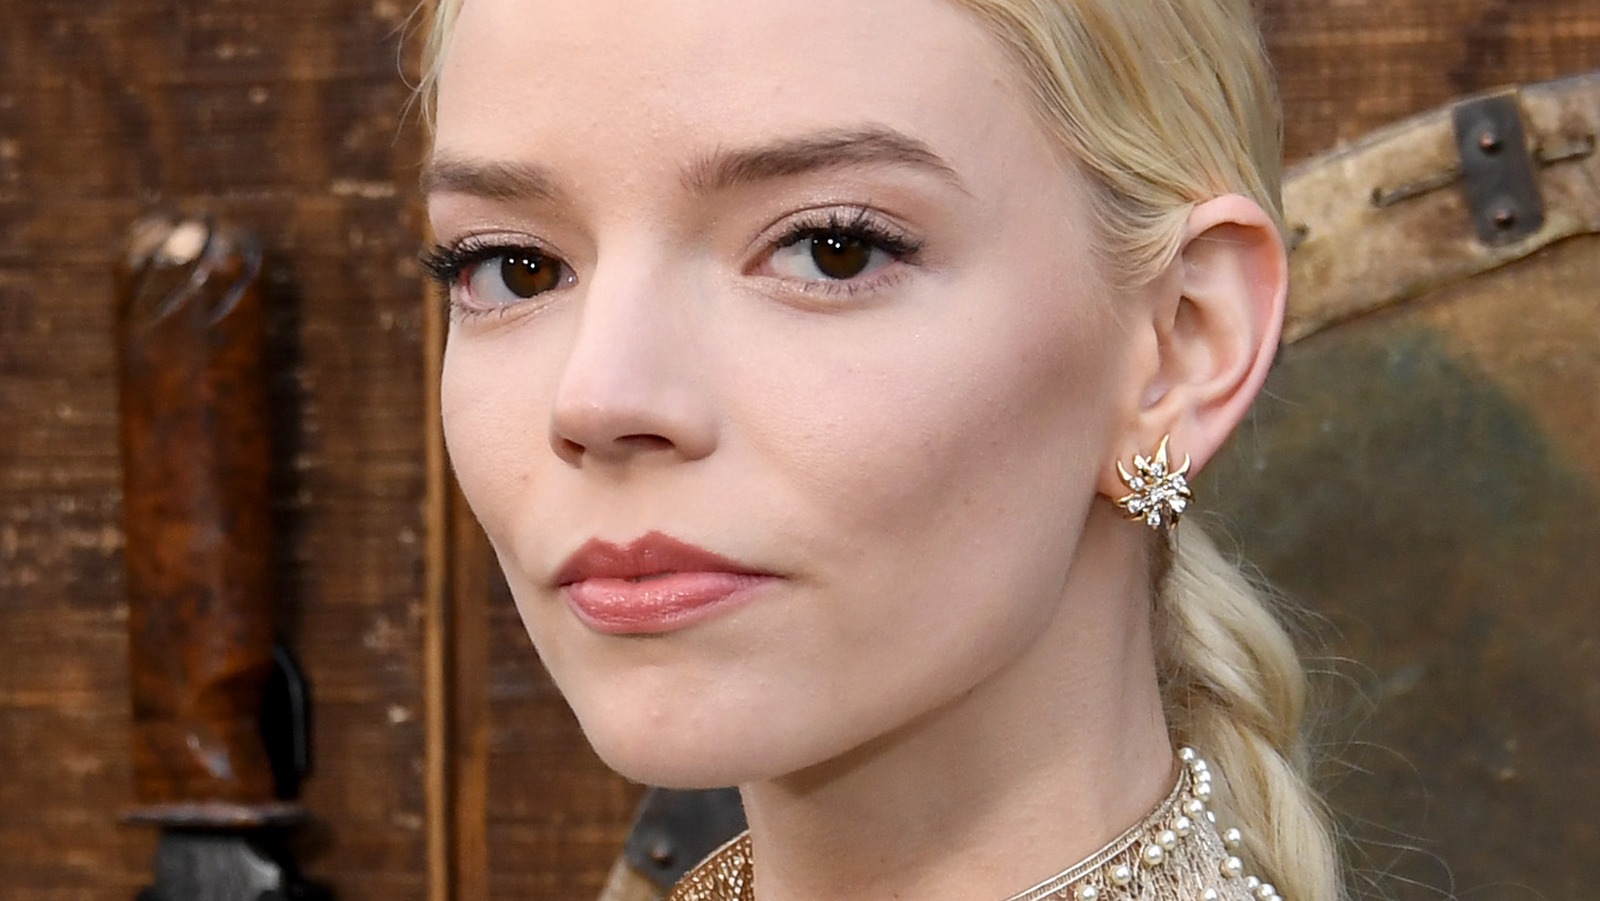 Anya Taylor-Joy On Why Her Furiosa Performance Has To Be Different